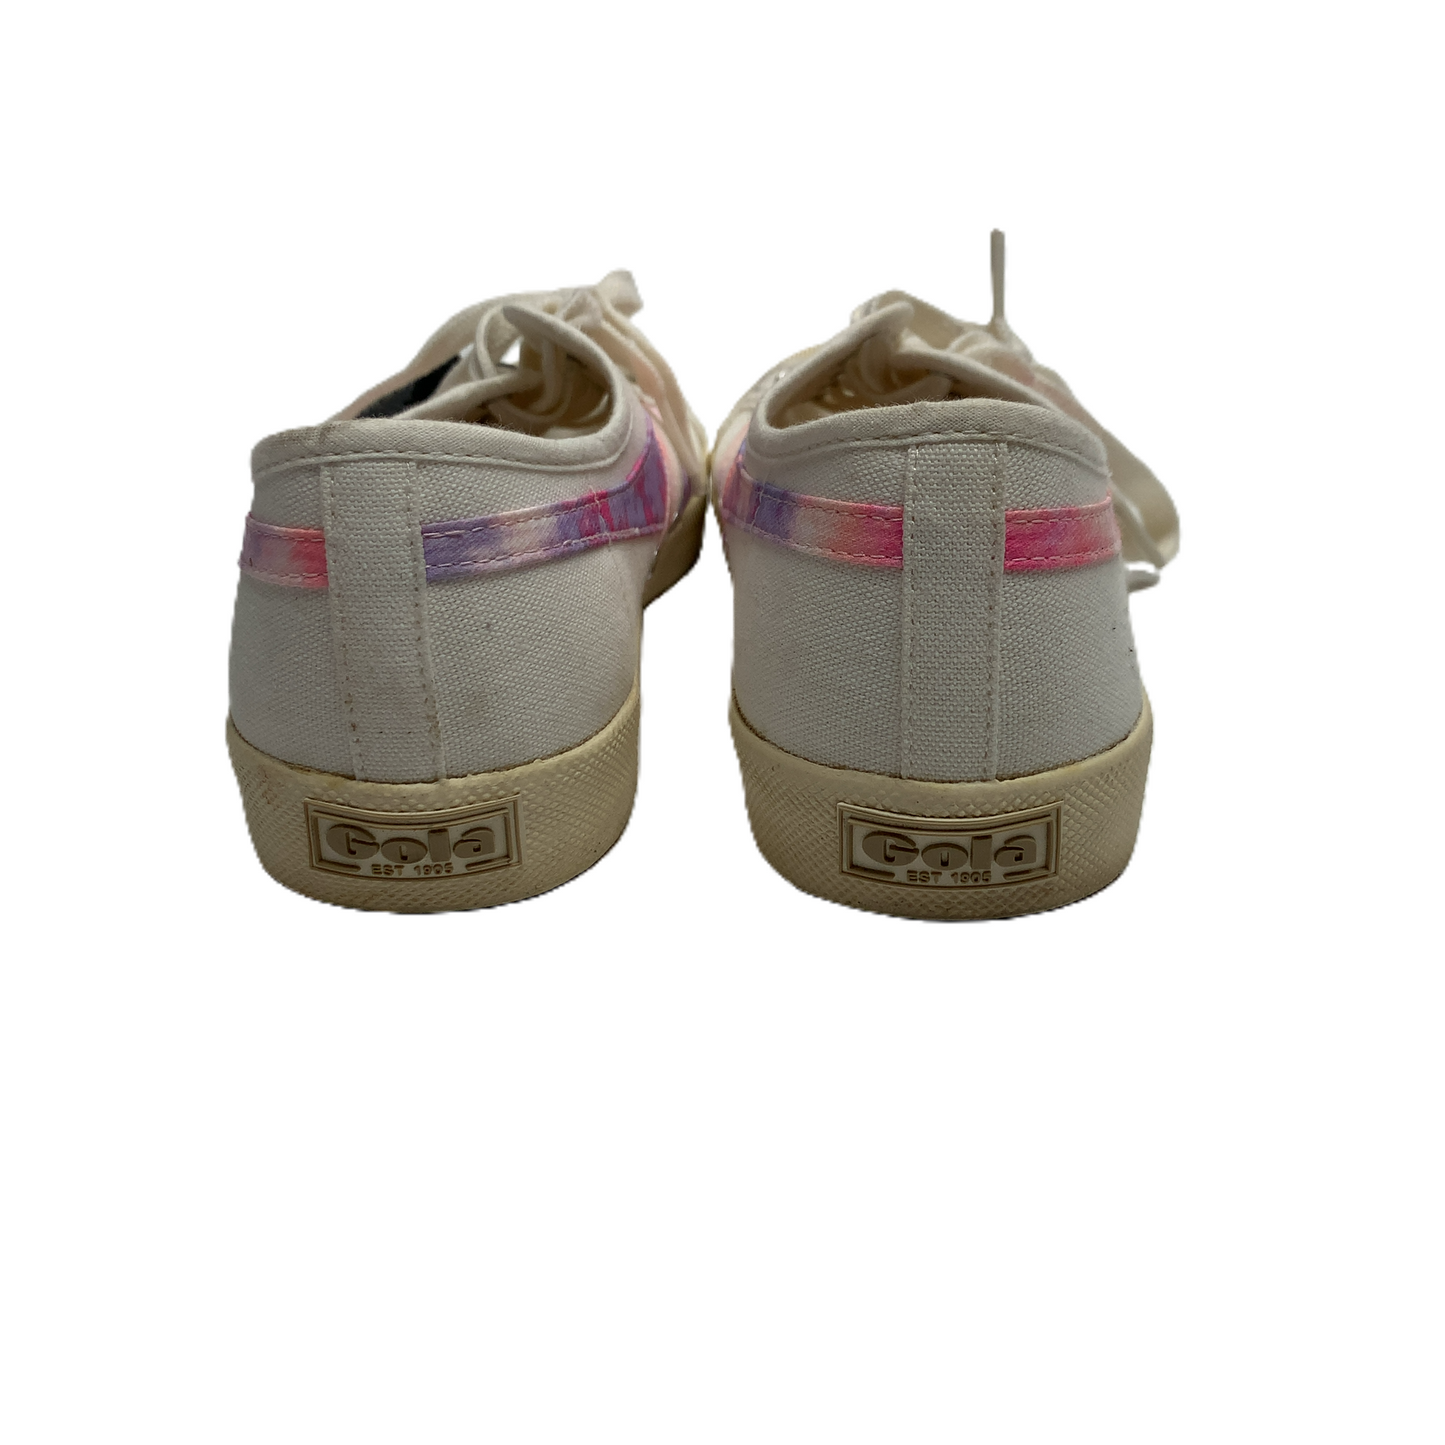 Shoes Sneakers By Gola  Size: 6